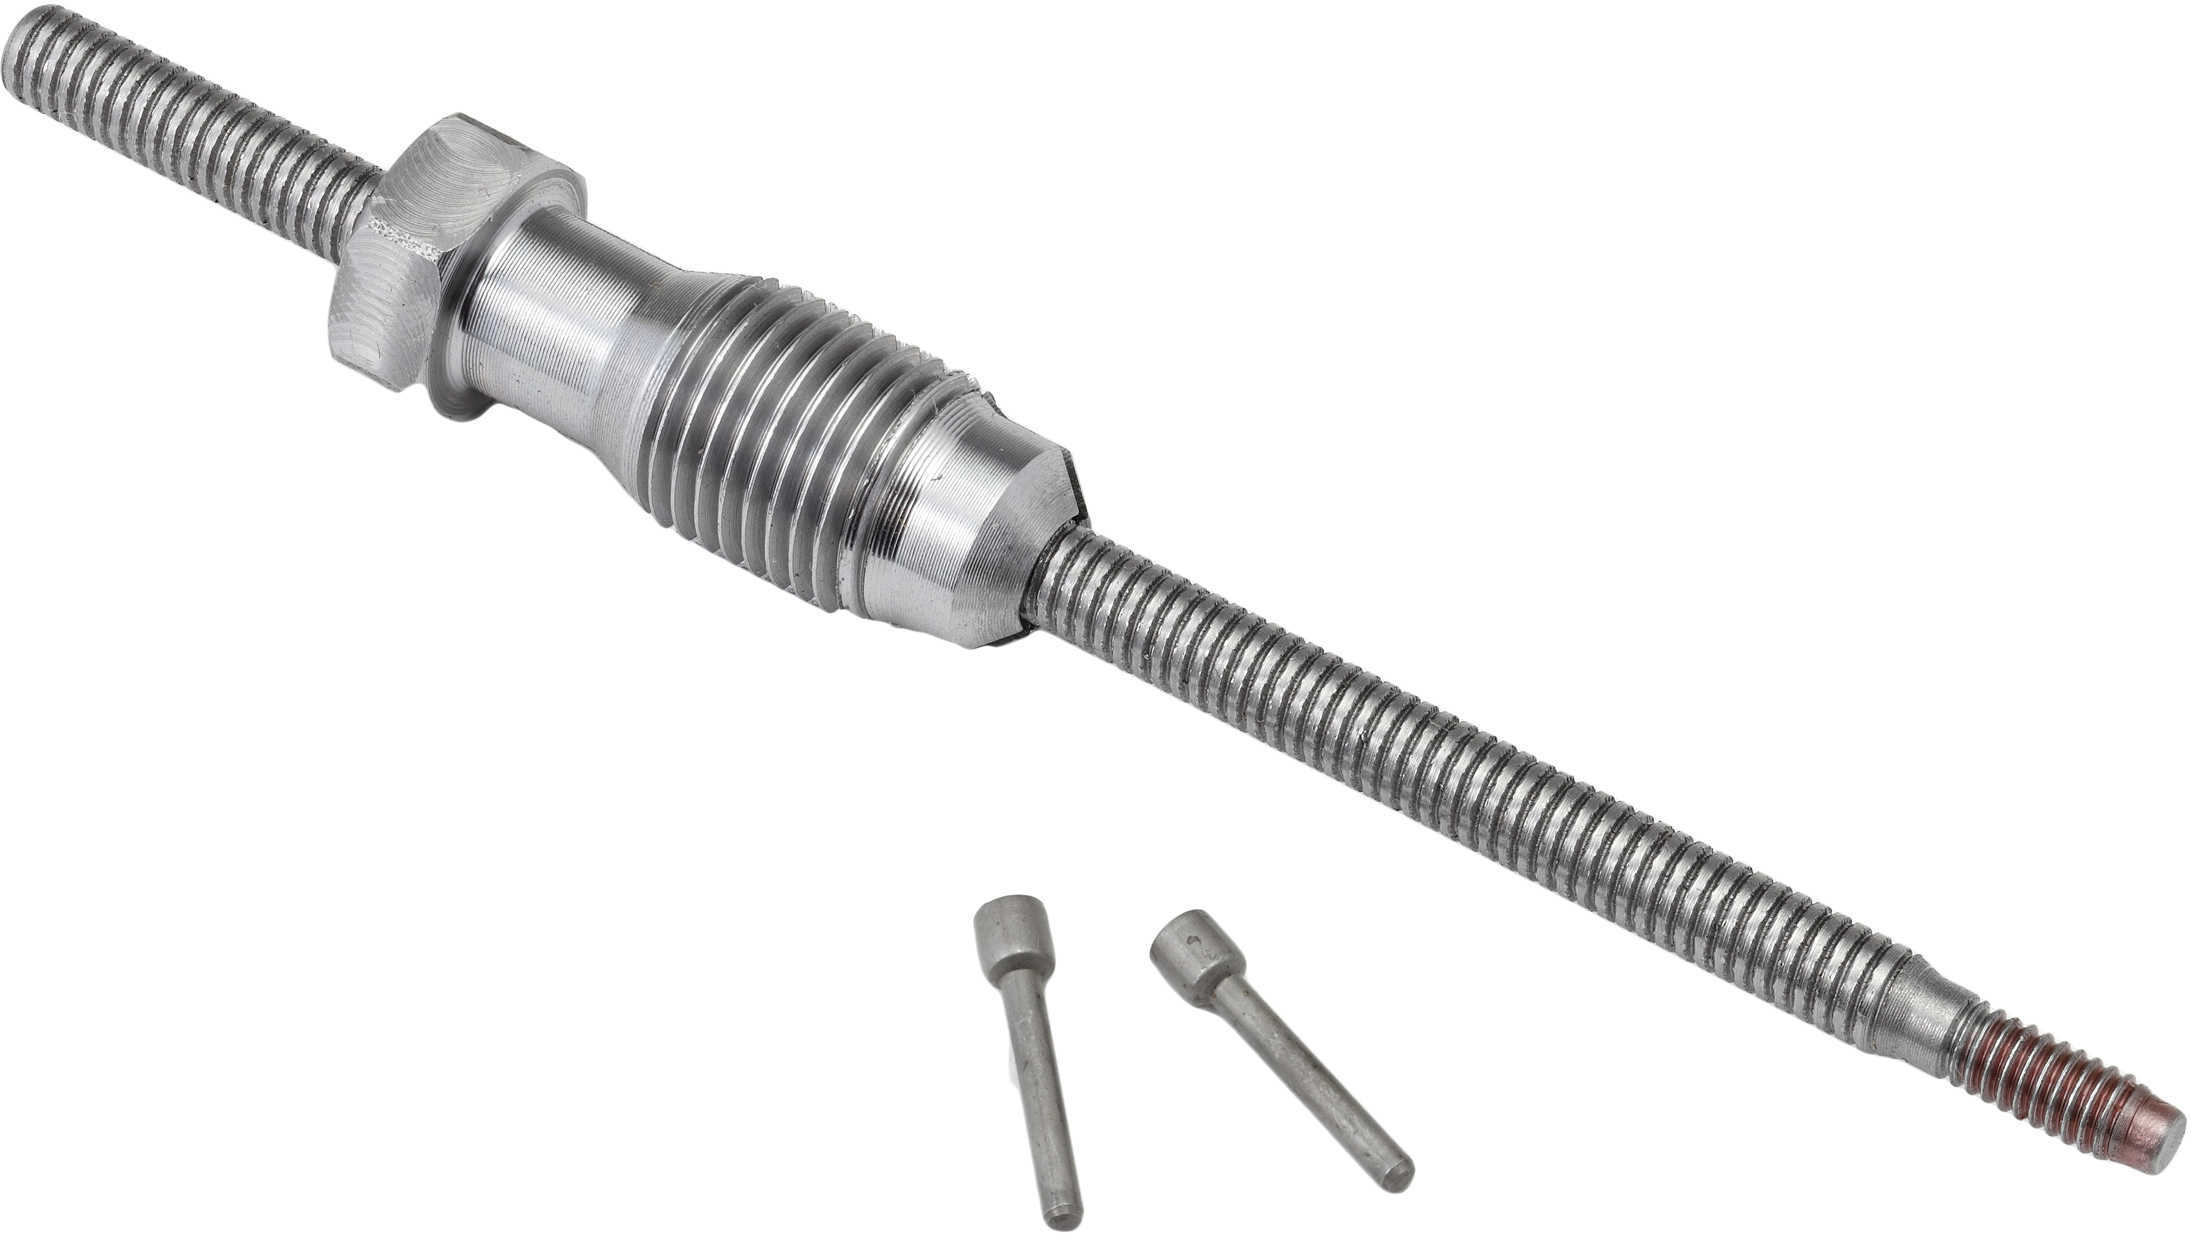 Hornady Zip Spindle Kit 043400